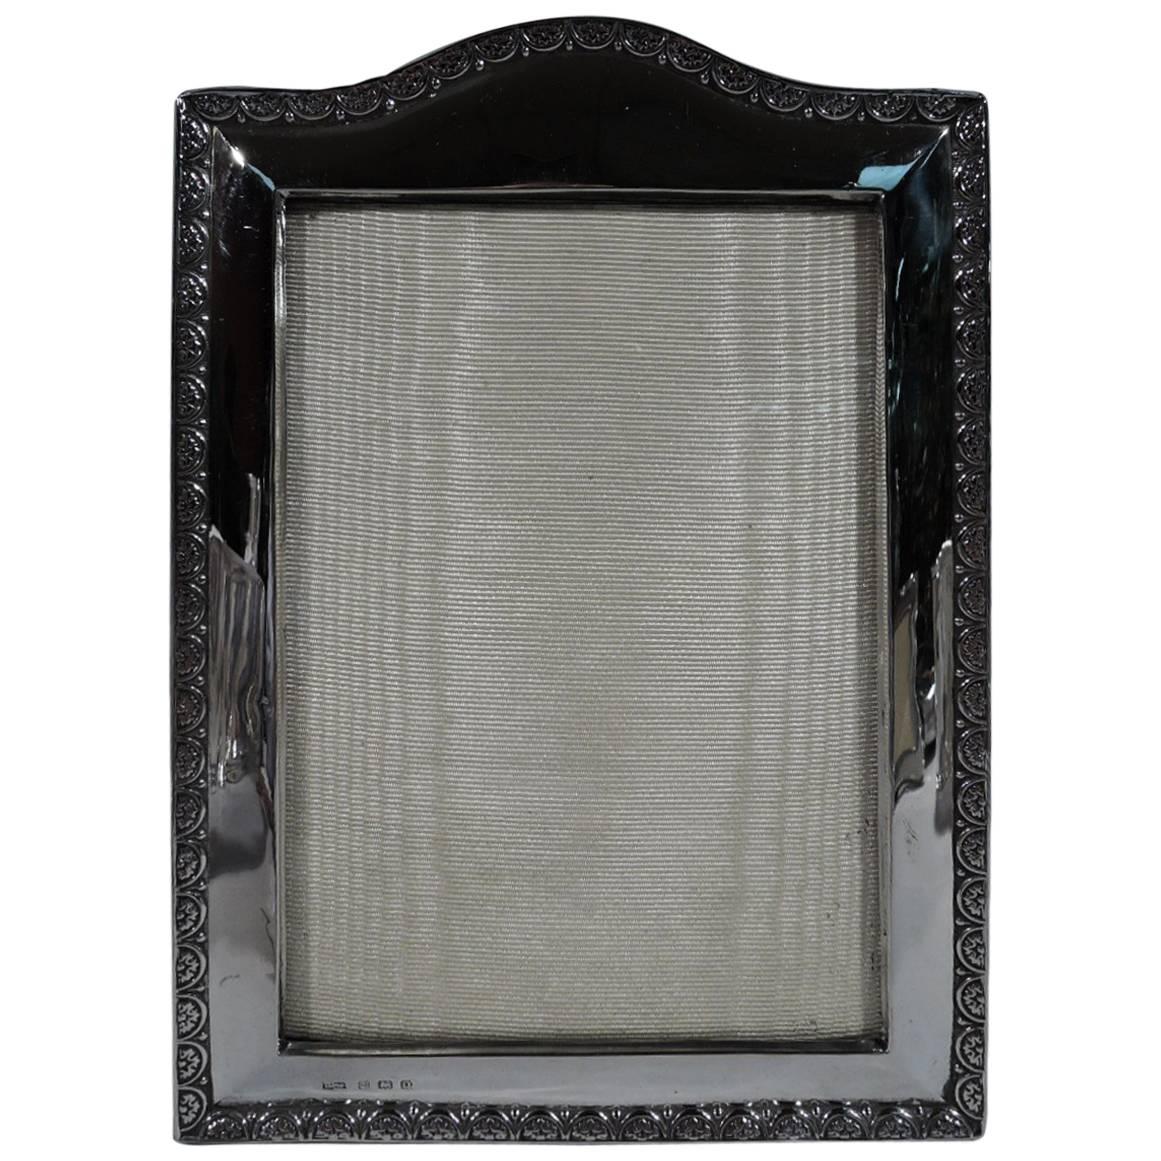 Antique English Sterling Silver Picture Frame